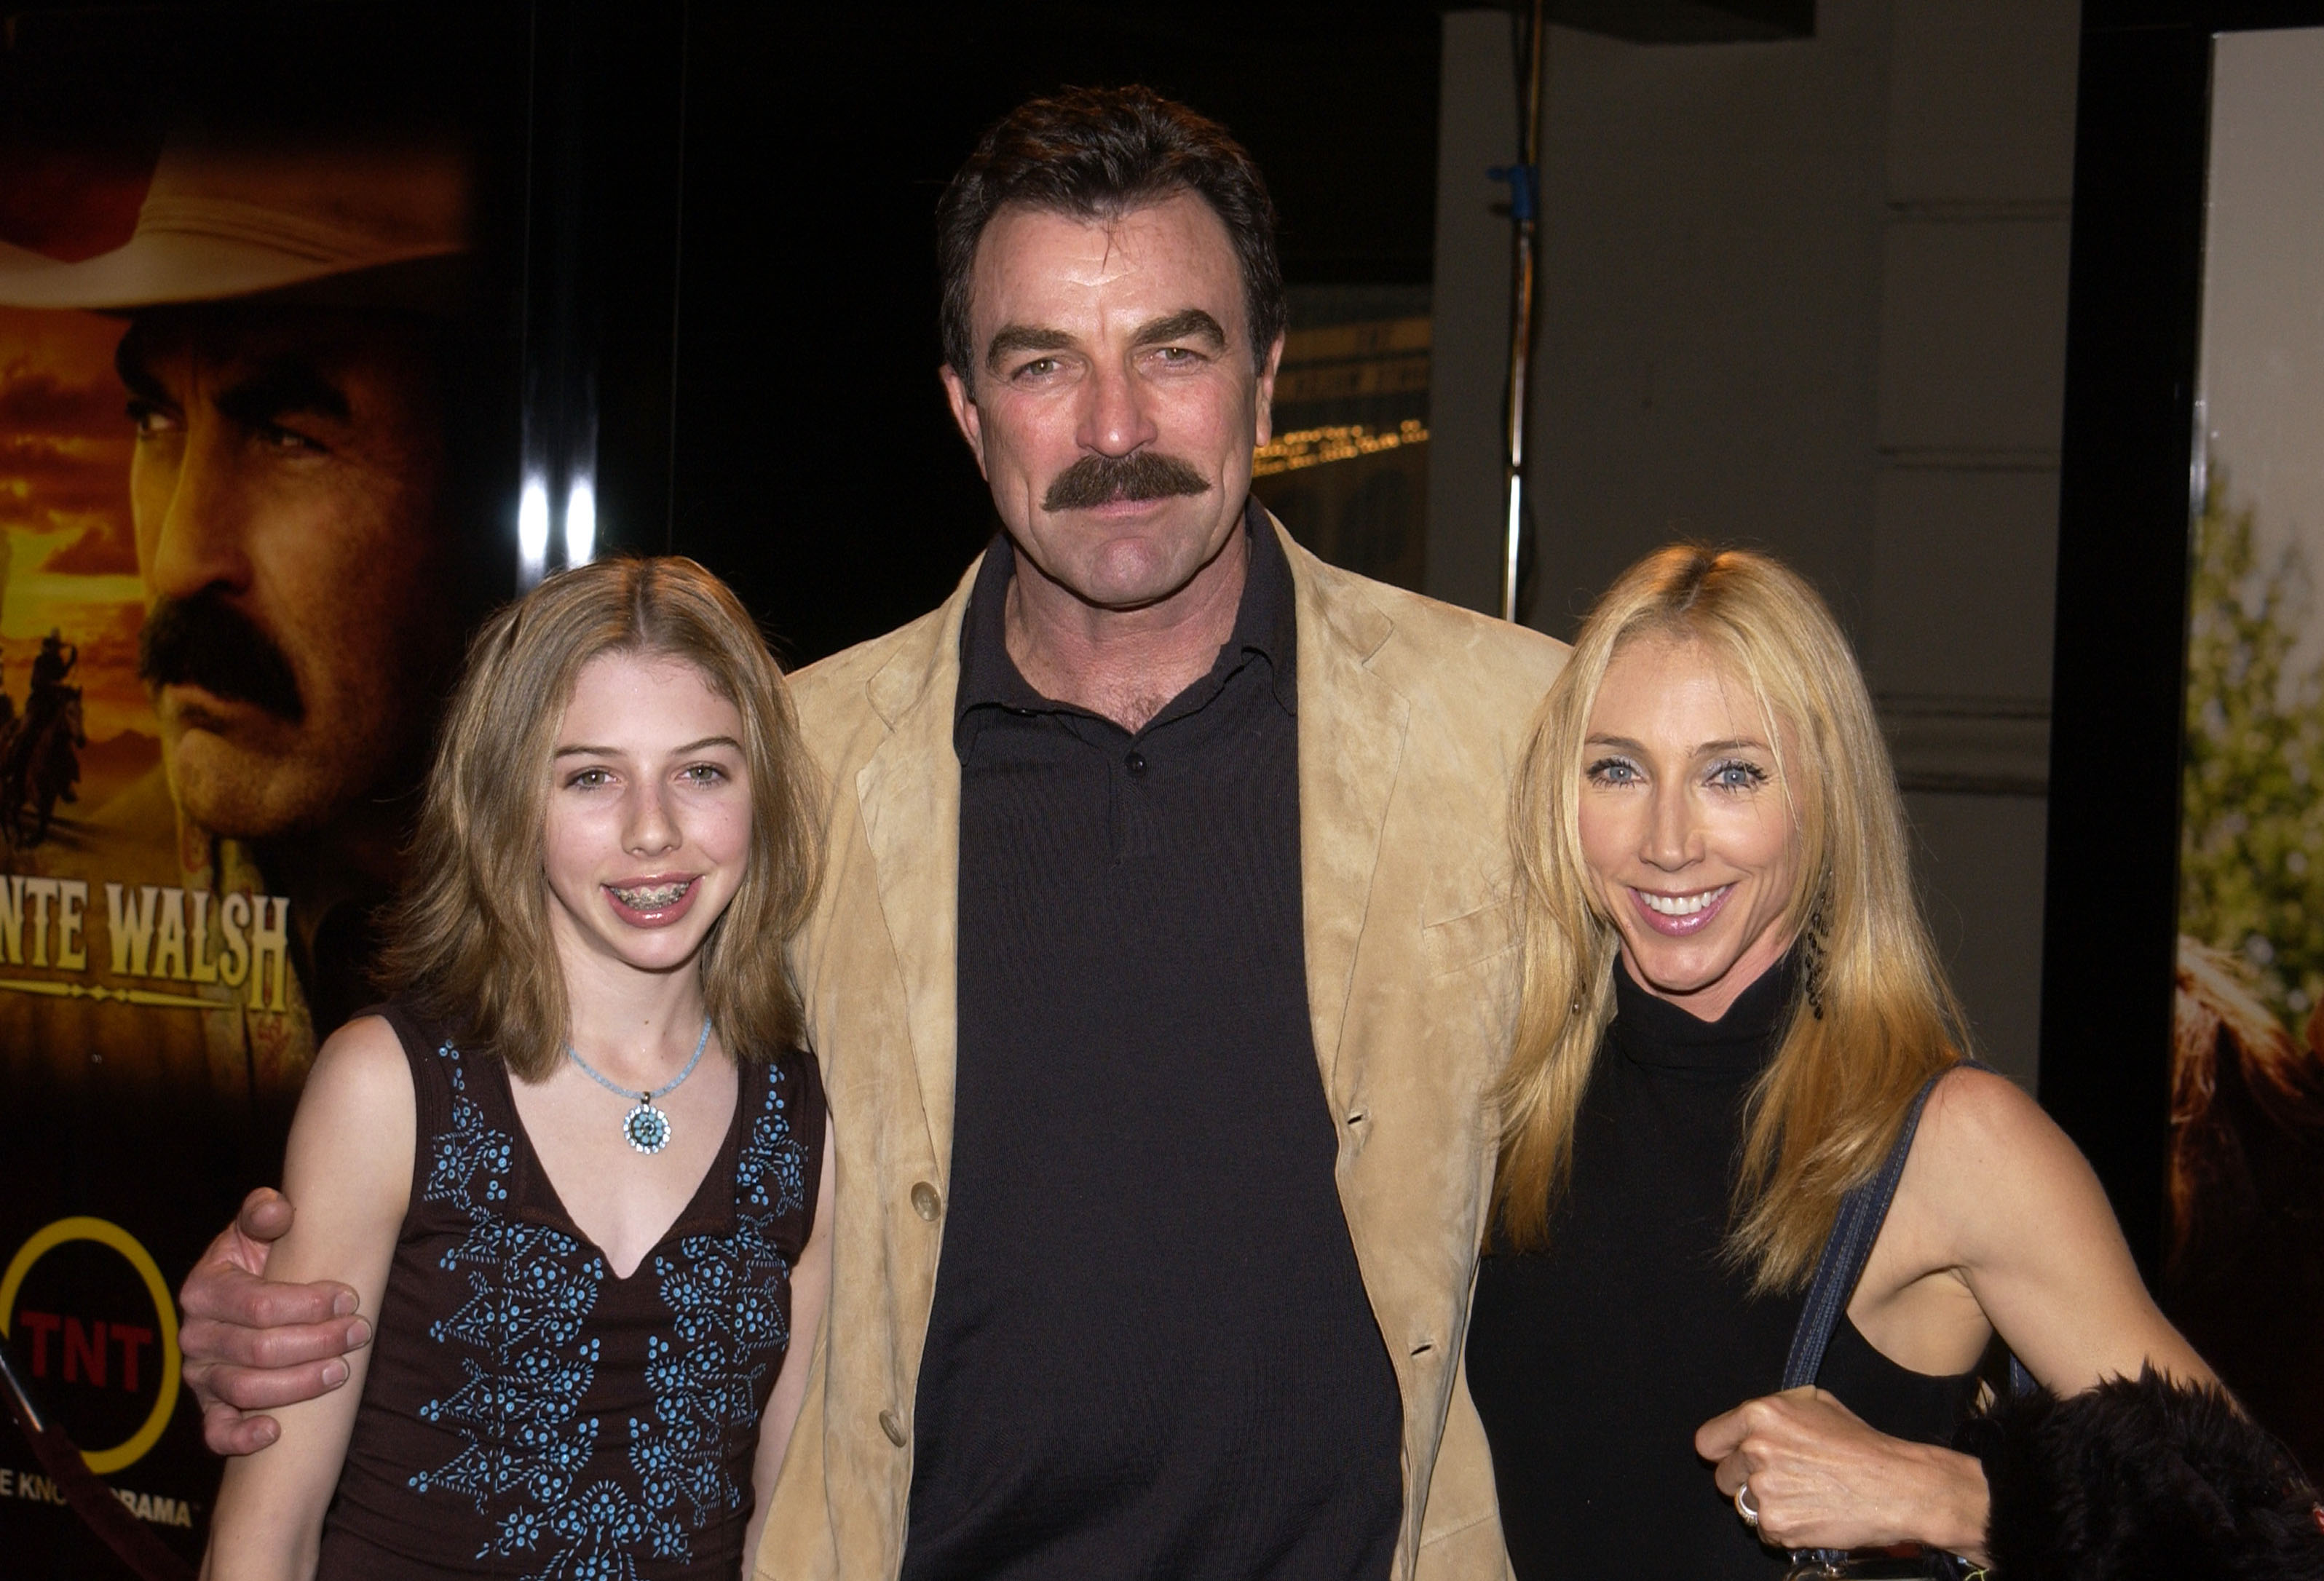 Hannah and Tom Selleck with Jillie Joan Mack at TNT's "Monte Walsh" premiere in 2003 | Source: Getty Images